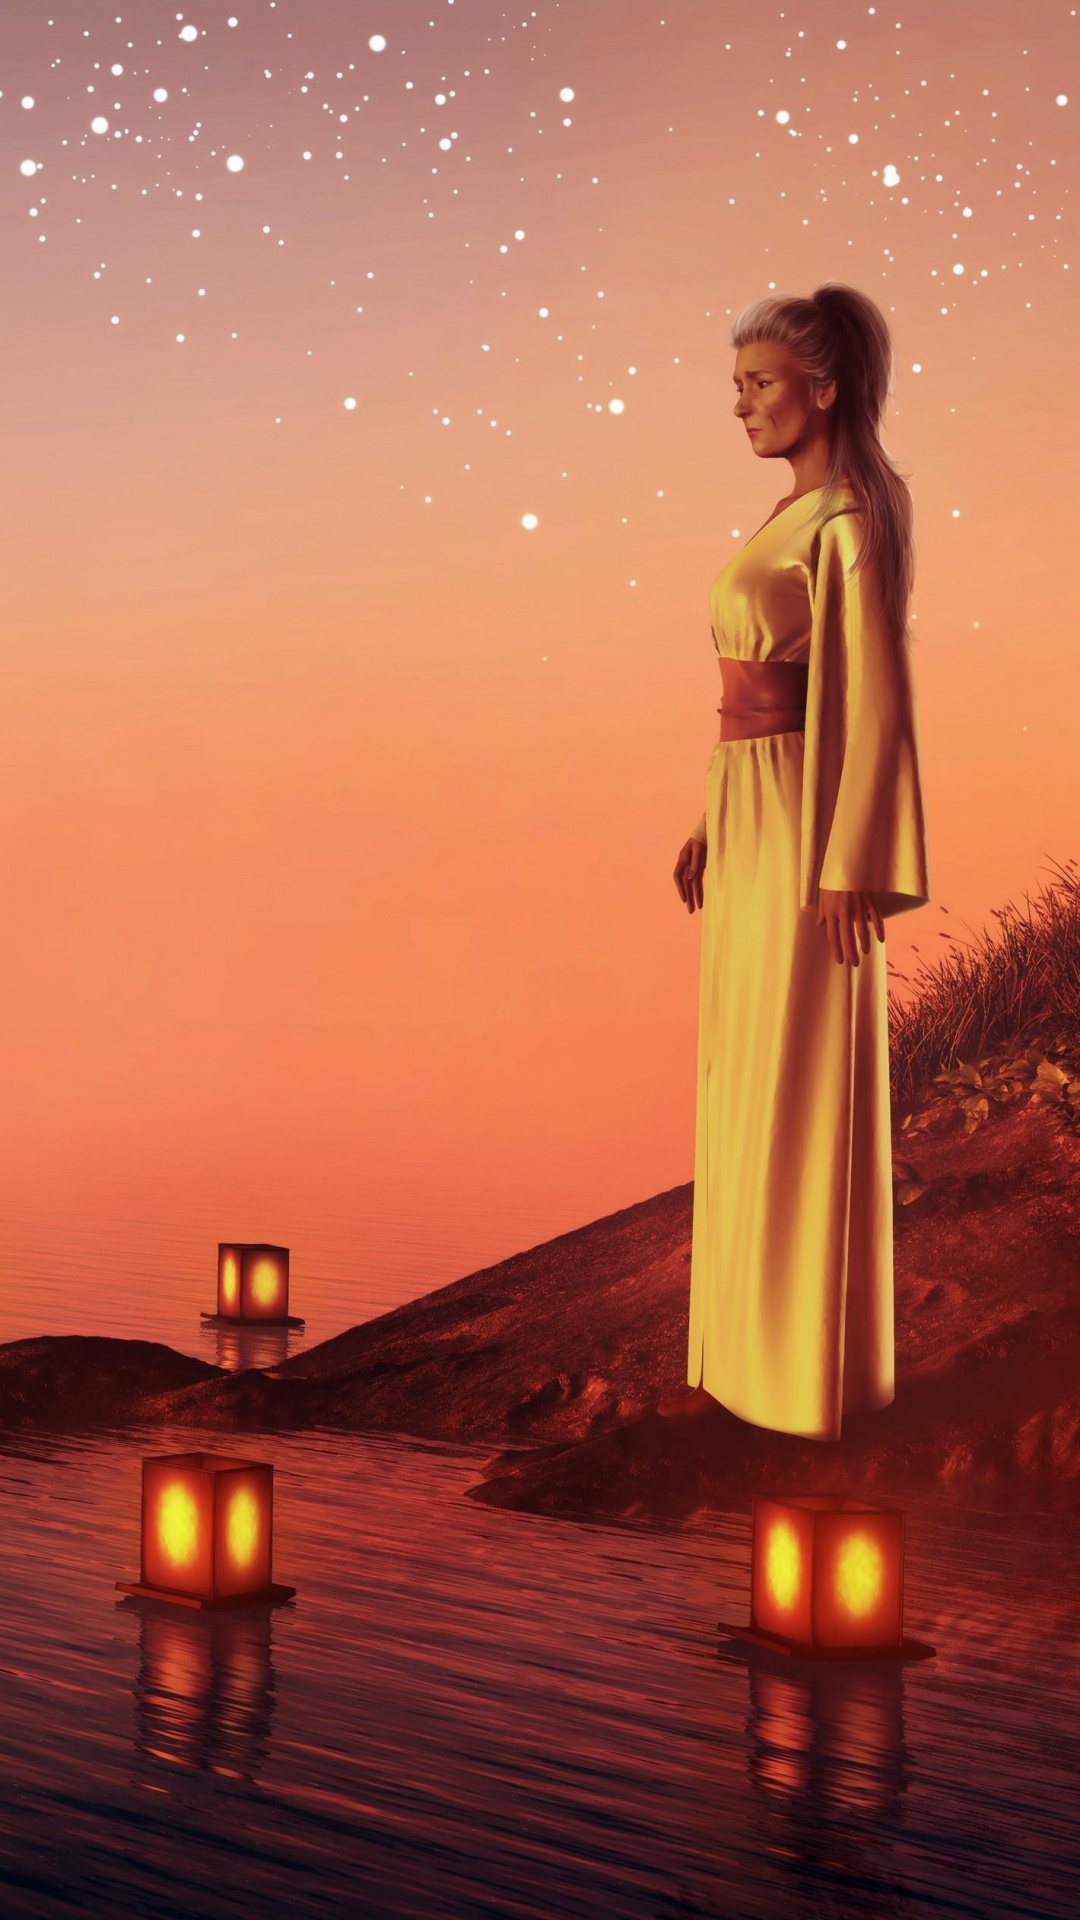 Woman in White Dress Standing on Dock During Sunset. Wallpaper in 1080x1920 Resolution